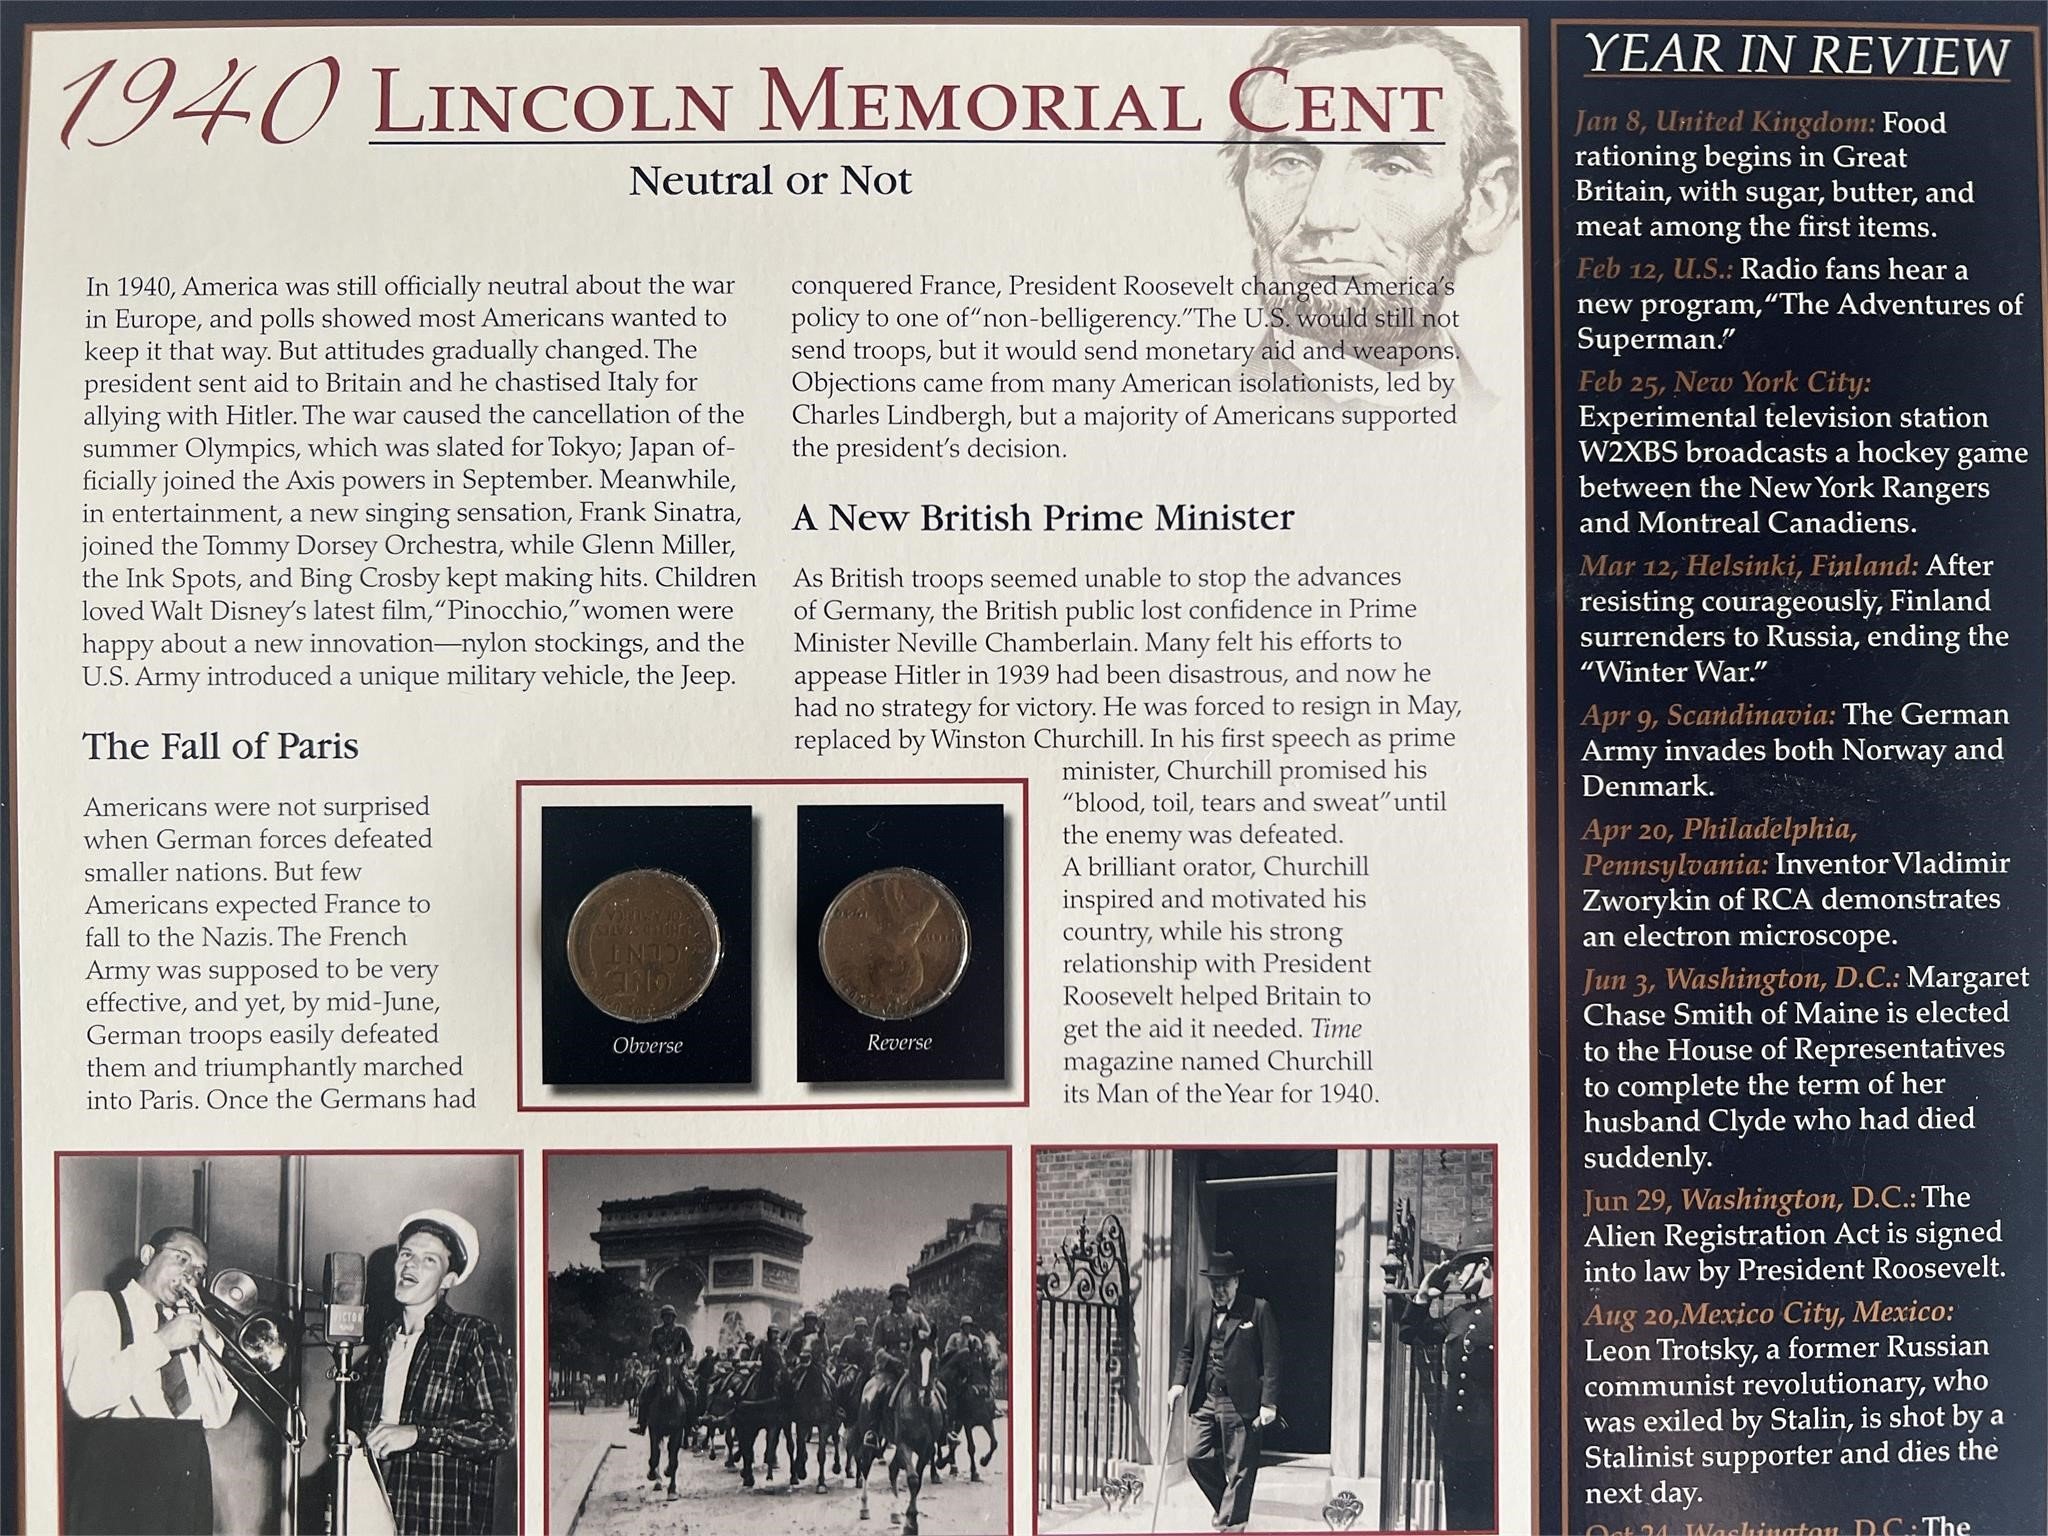 1940 Lincoln Memorial Cent Panel